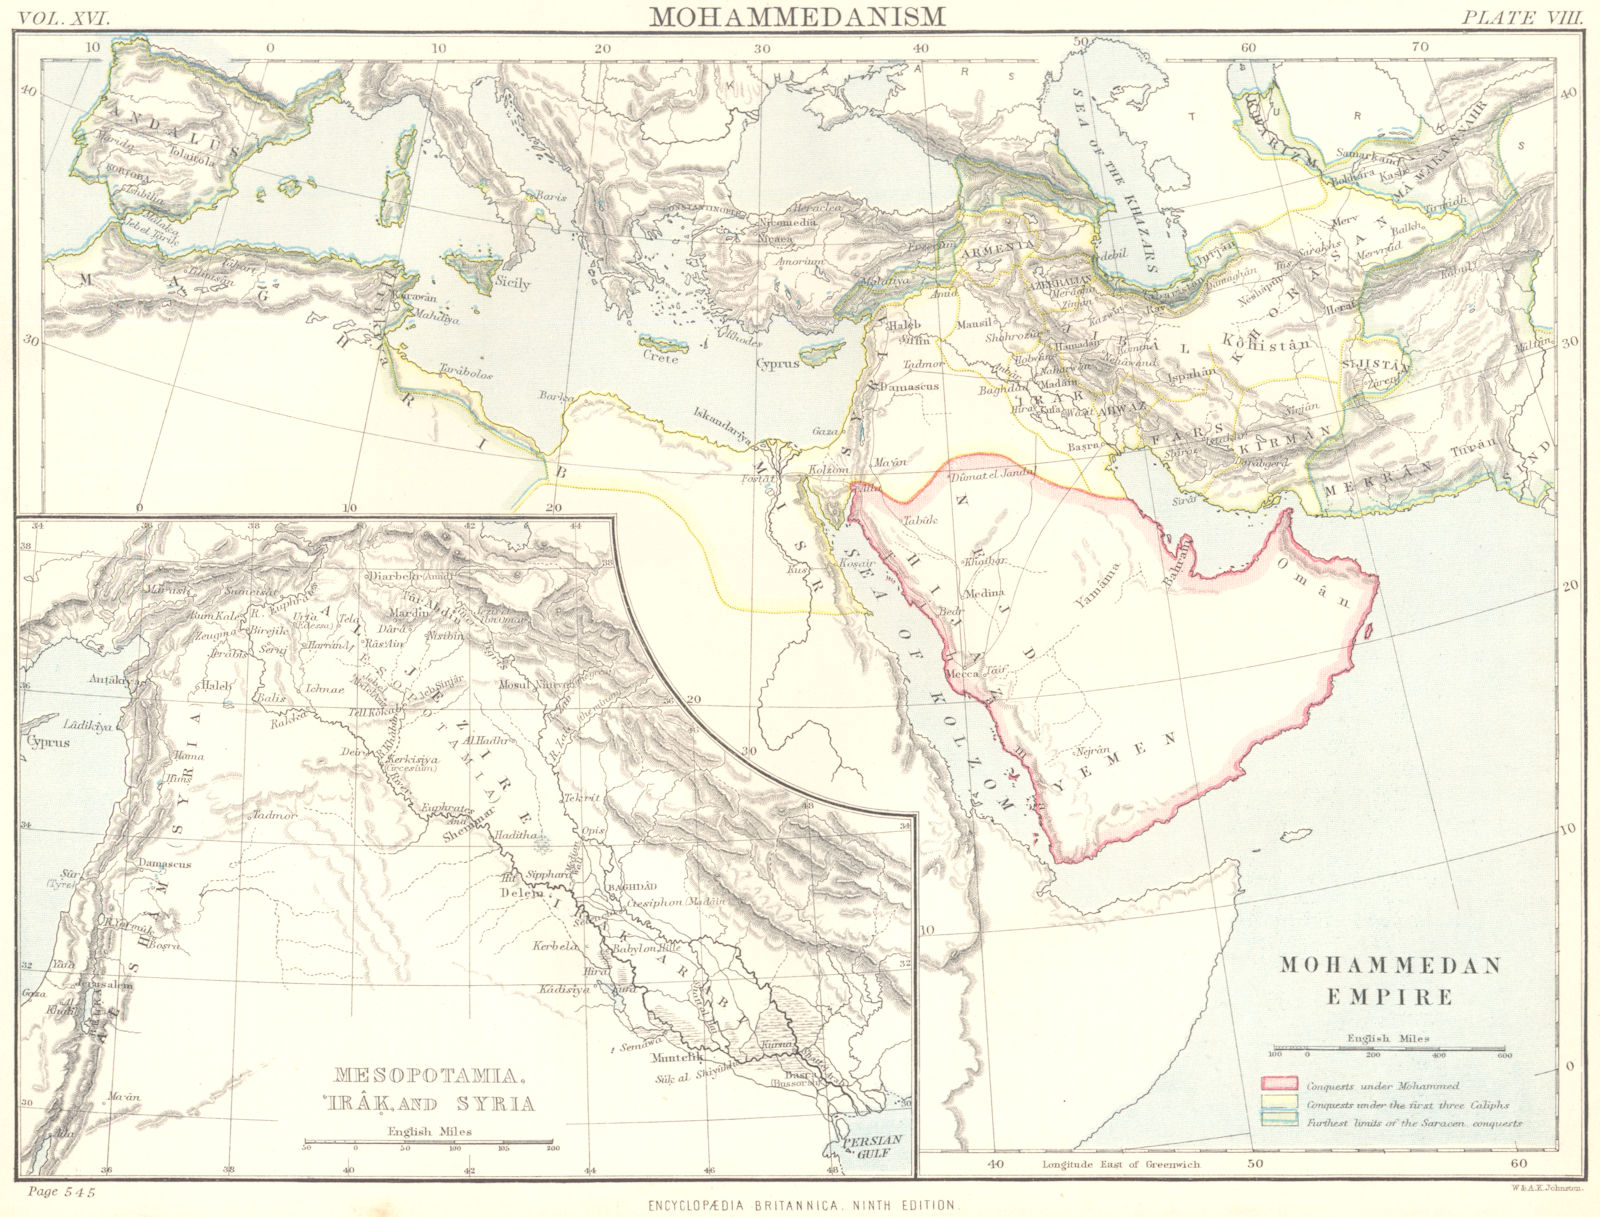 Associate Product MIDDLE EAST. Islam Muslim Empire; Inset map of Mesopotamia, Iraq & Syria. 1898